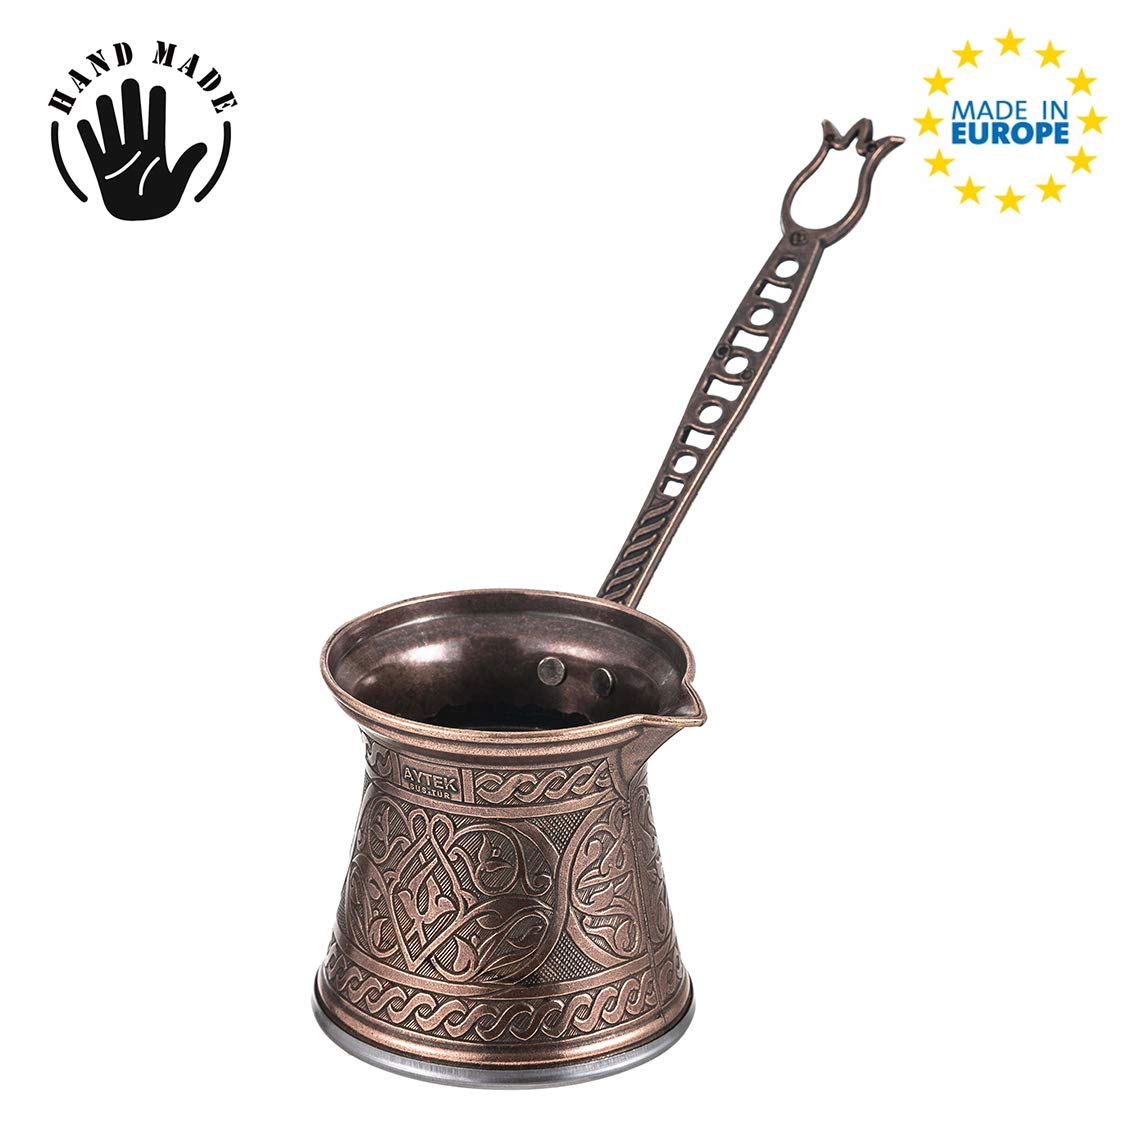 Turkish Coffee Pot, Moka Pot, Espresso Maker for the Stove Top, Camping Coffee Pot, Handmade Greek Arabic Coffee Warmer Cezve with Brass Handle, Stainless Steel Inside (Large 10.7 oz, Copper)